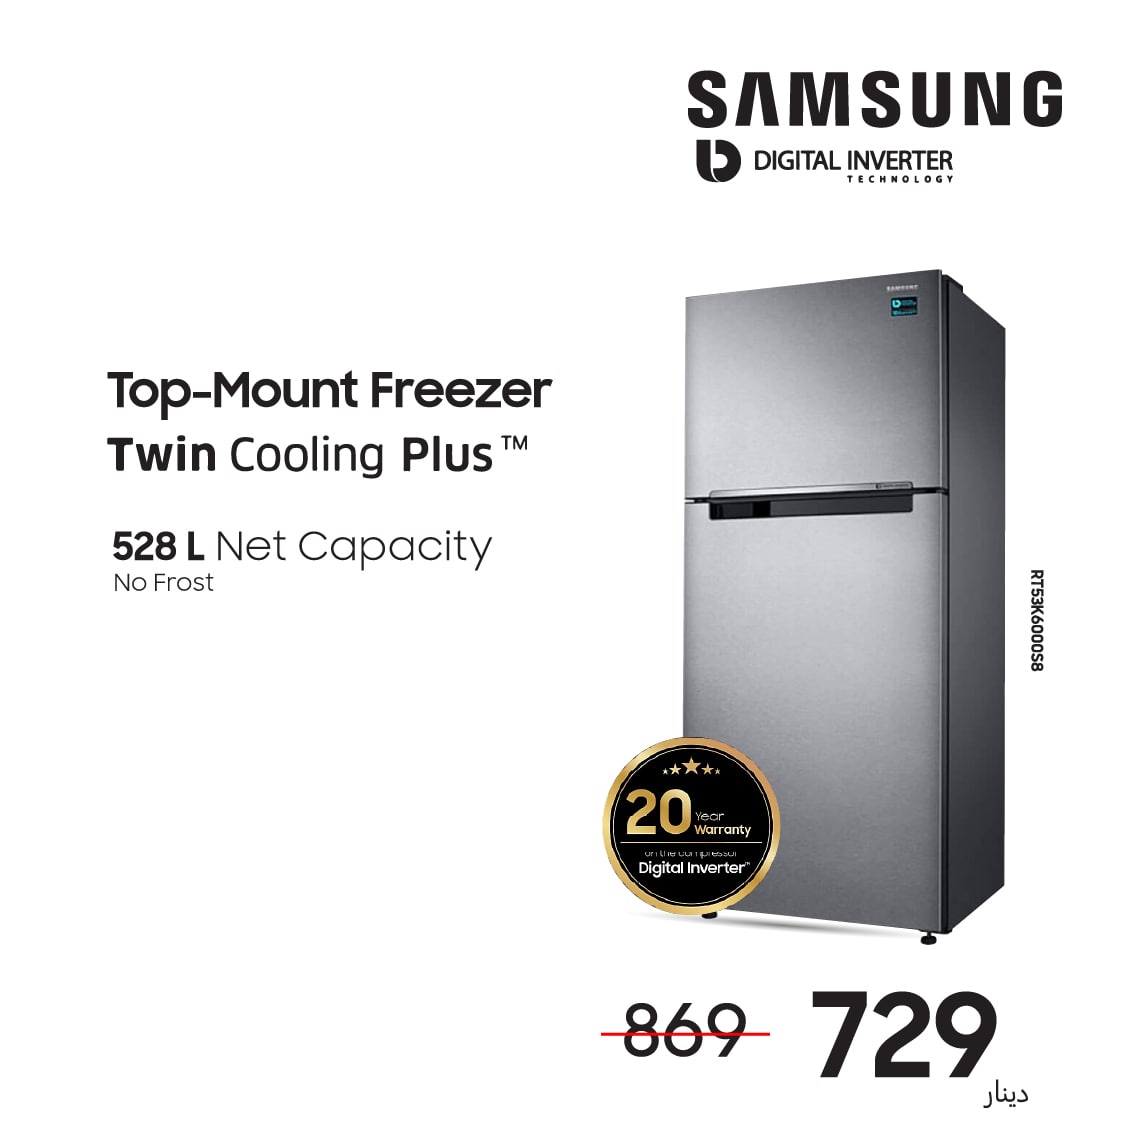 SAMSUNG Top Mount Refrigerator with Twin Cooling Plus™ Technology 500L